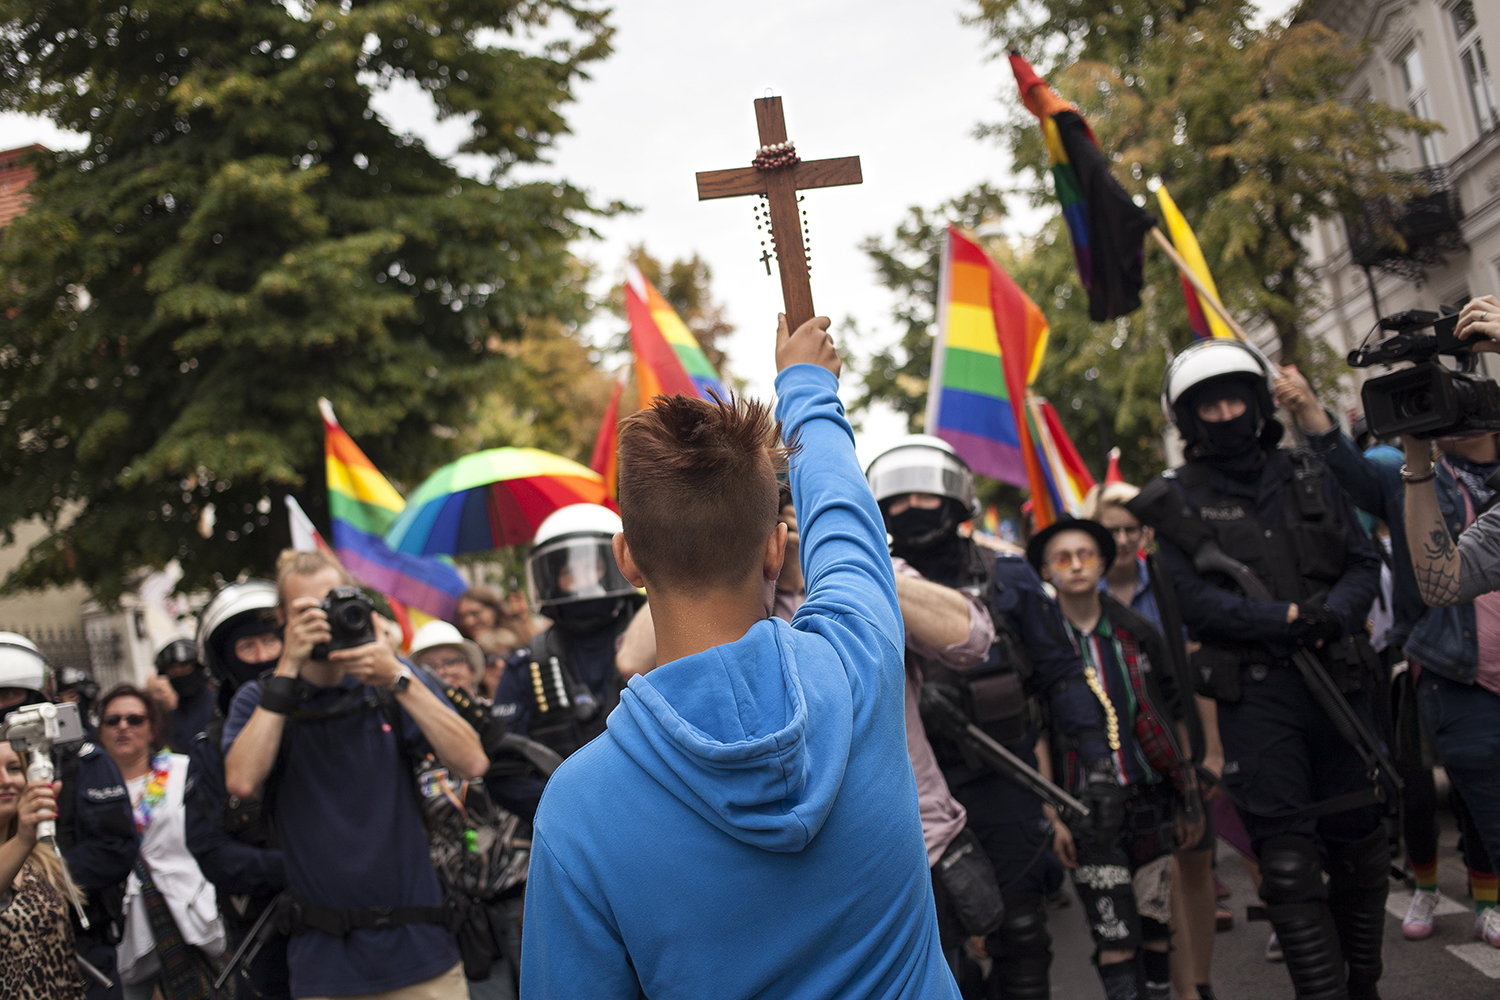 How Poland’s “LGBT-free zones” sparked debate on equality and democracy